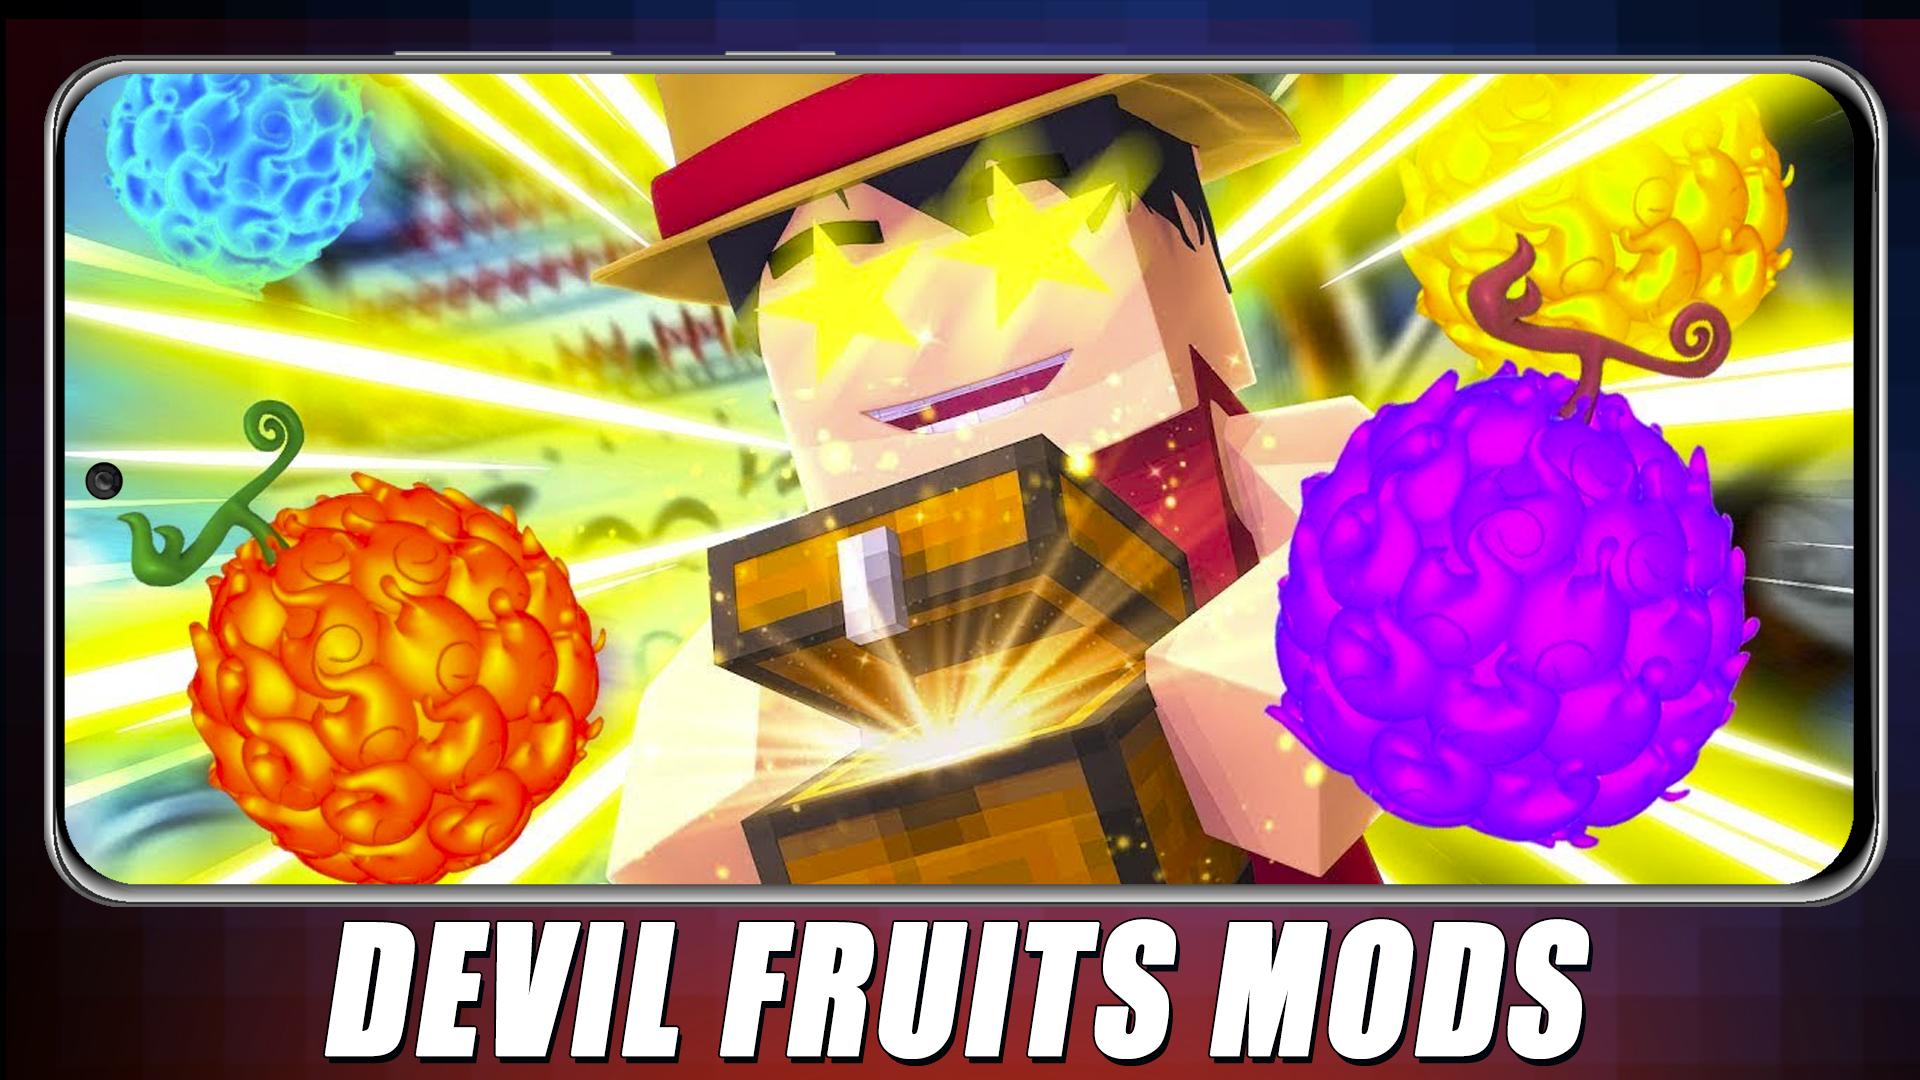 Download Mod Blox Fruits for Minecraft android on PC